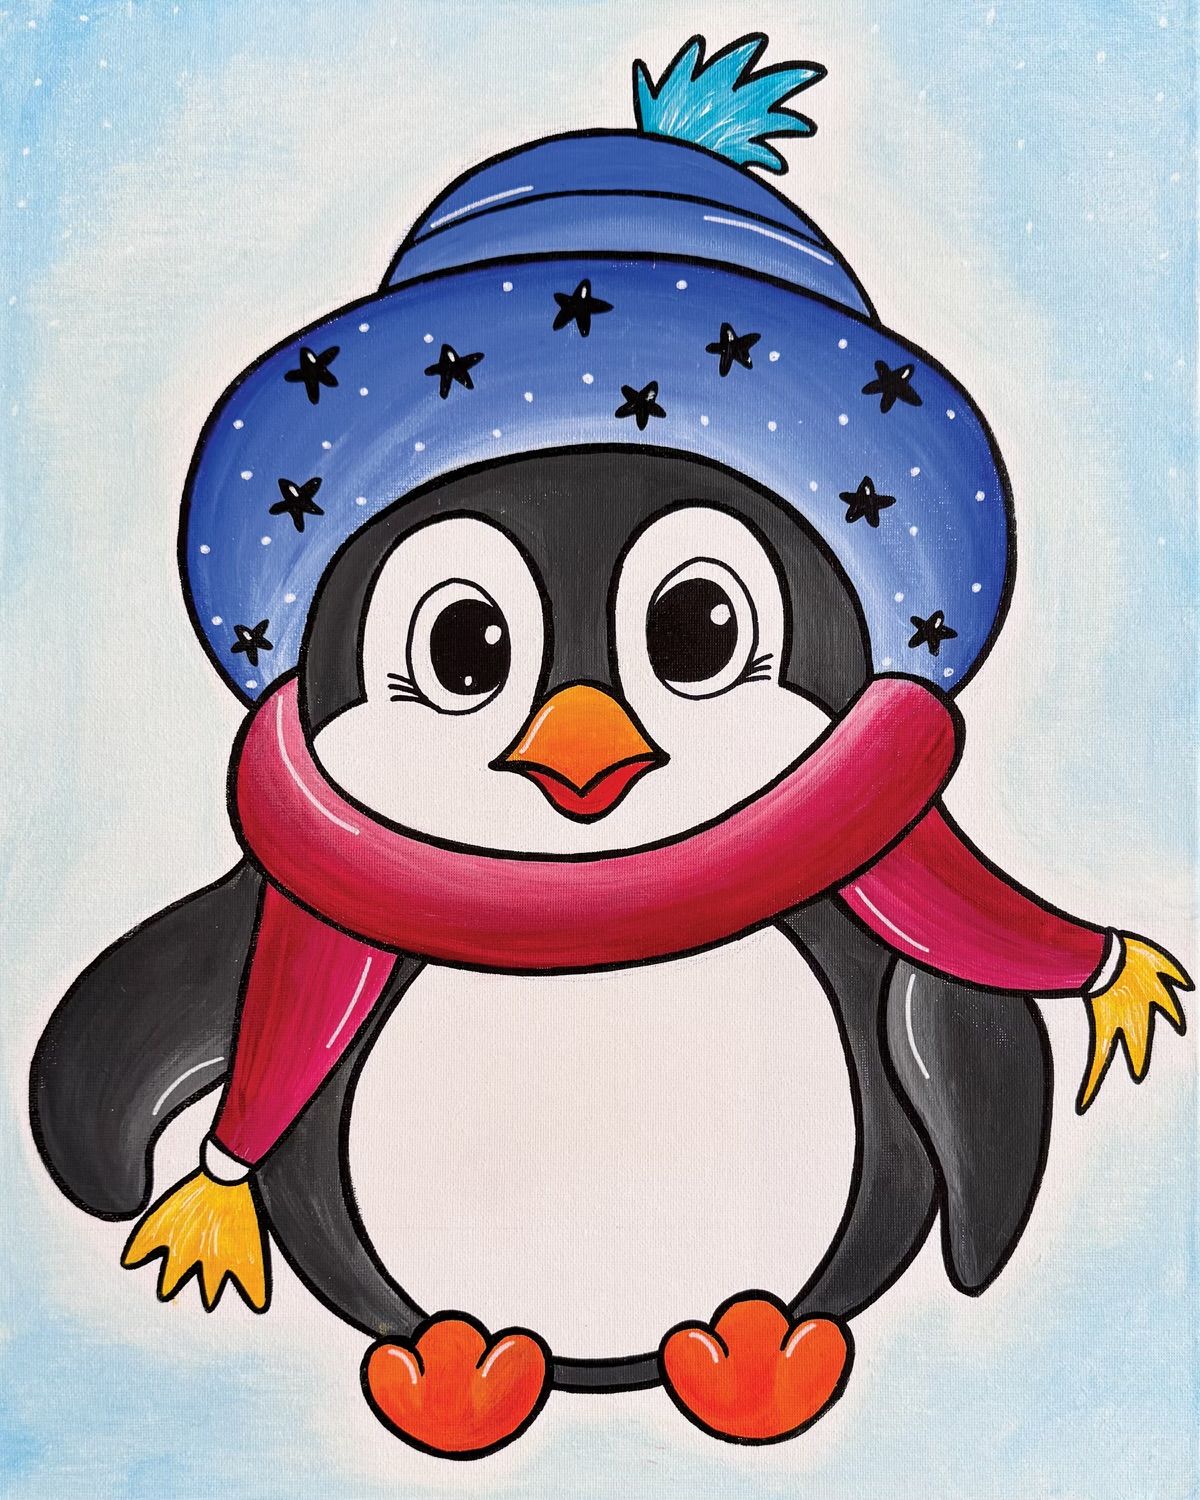 Wednesday 3rd July Kids Painting Class "Paint Your Penguin" 10.30am by Joanne Barnes